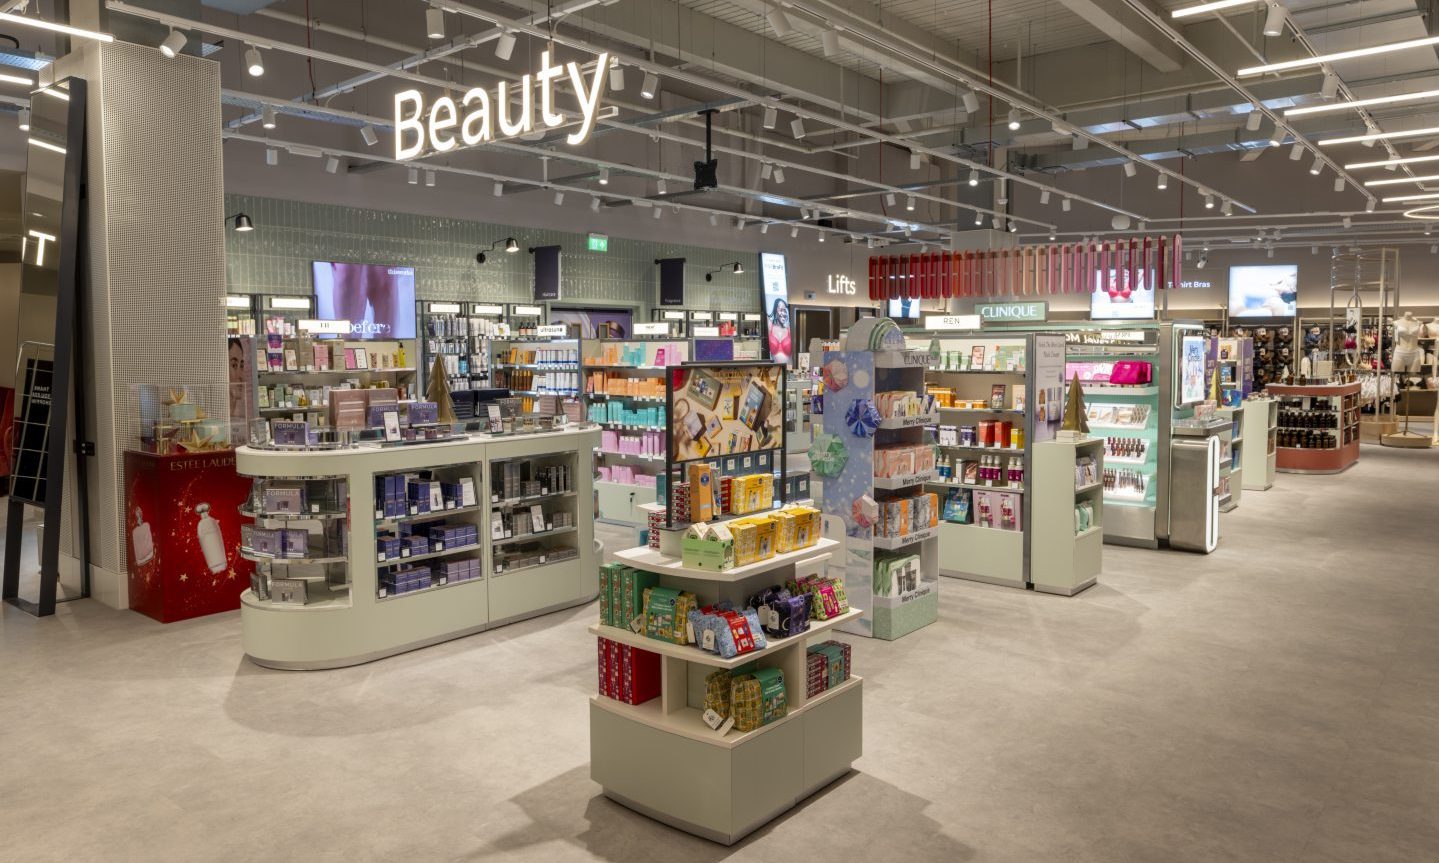 The beauty section